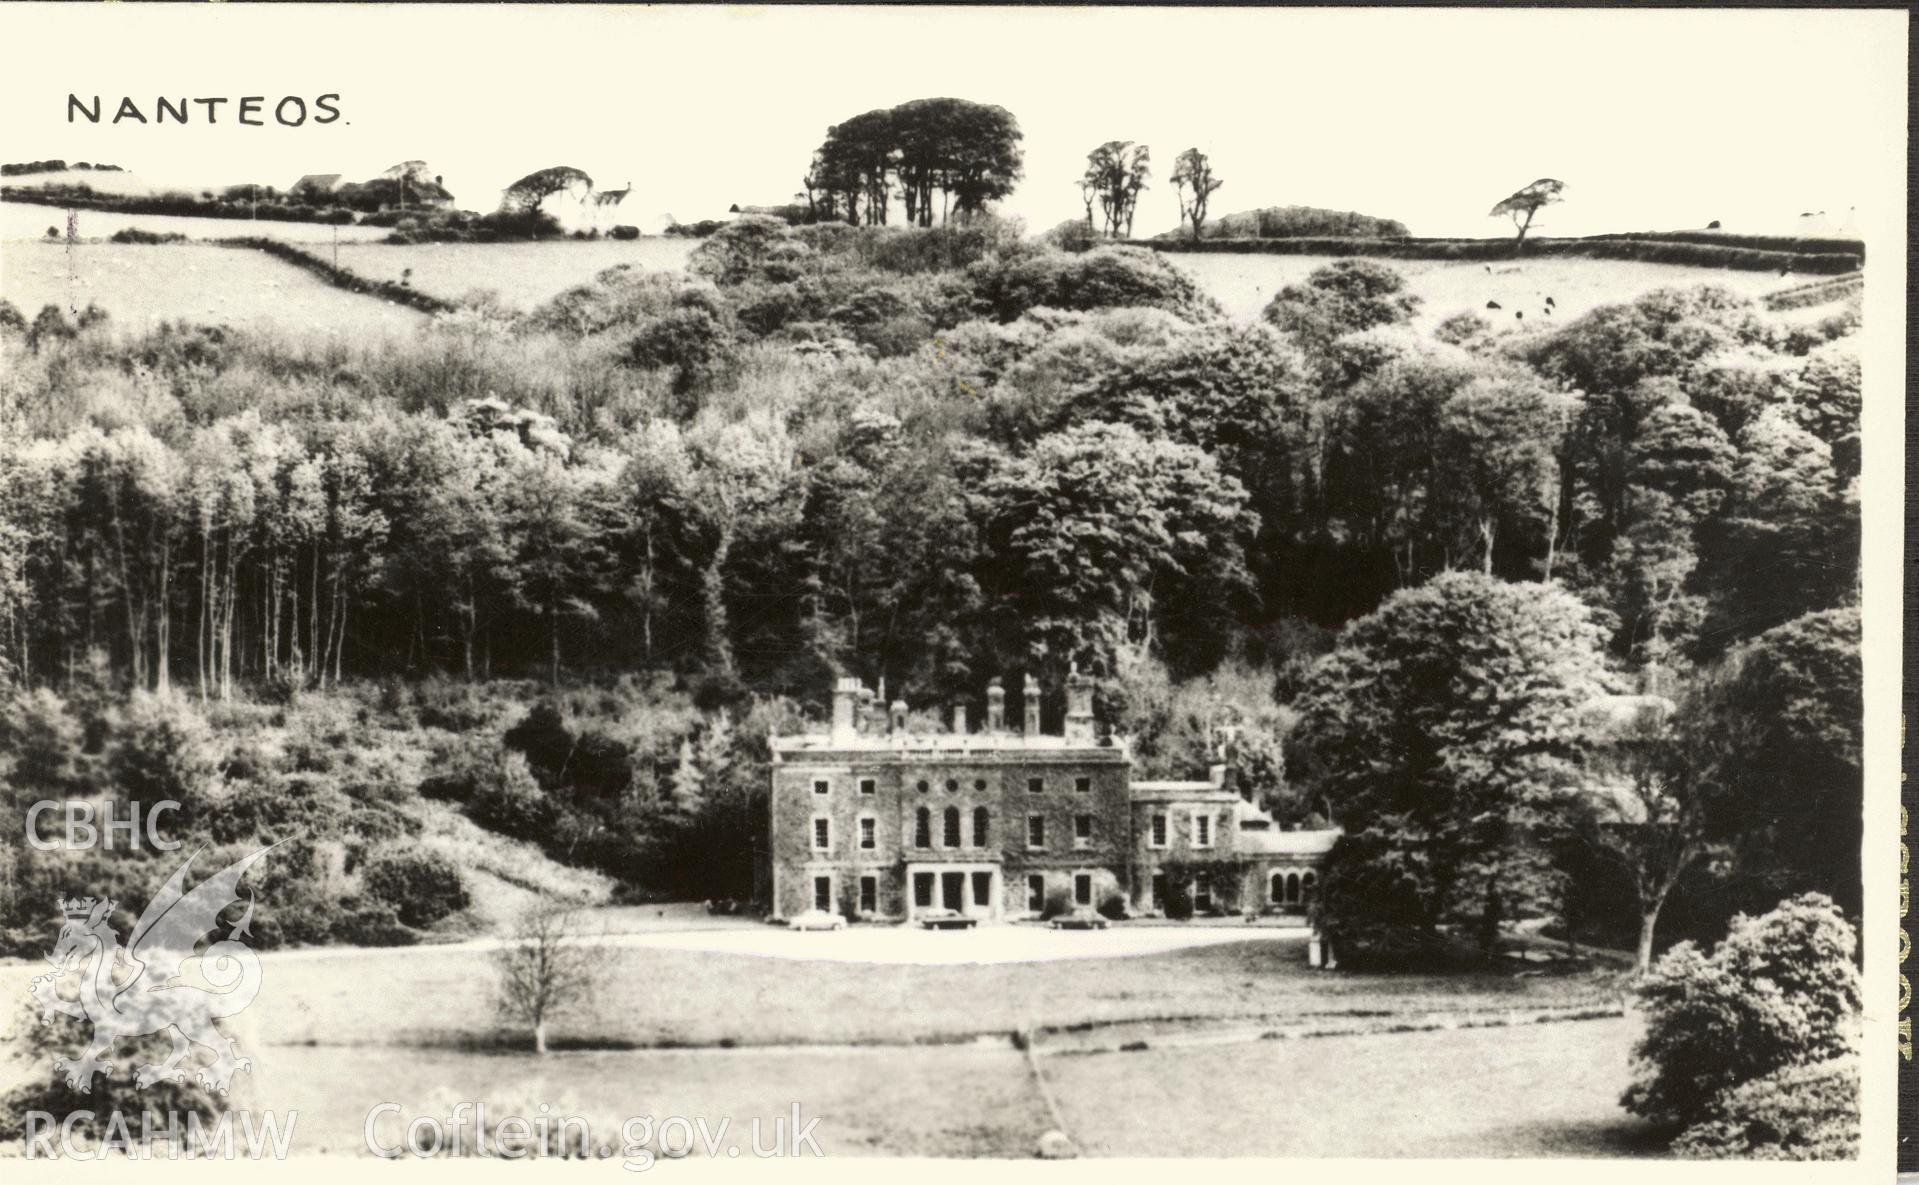 Digitised postcard image of Nanteos Mansion, Llanfarian. Produced by Parks and Gardens Data Services, from an original item in the Peter Davis Collection at Parks and Gardens UK. We hold only web-resolution images of this collection, suitable for viewing on screen and for research purposes only. We do not hold the original images, or publication quality scans.